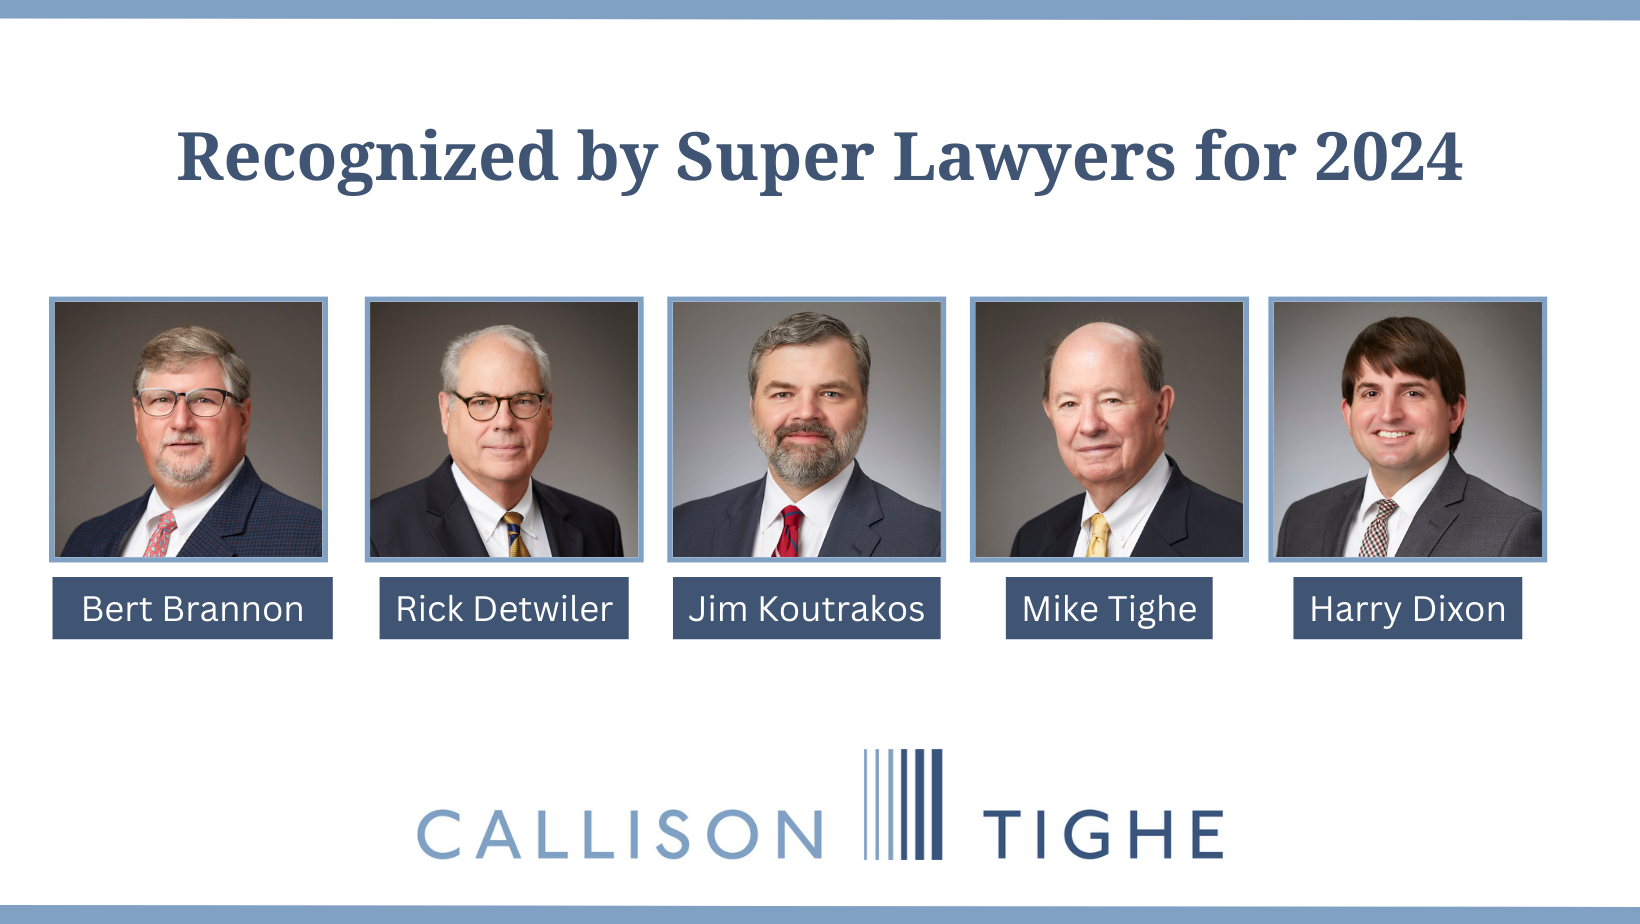 Five Callison Tighe attorneys recognized by Super Lawyers for 2024